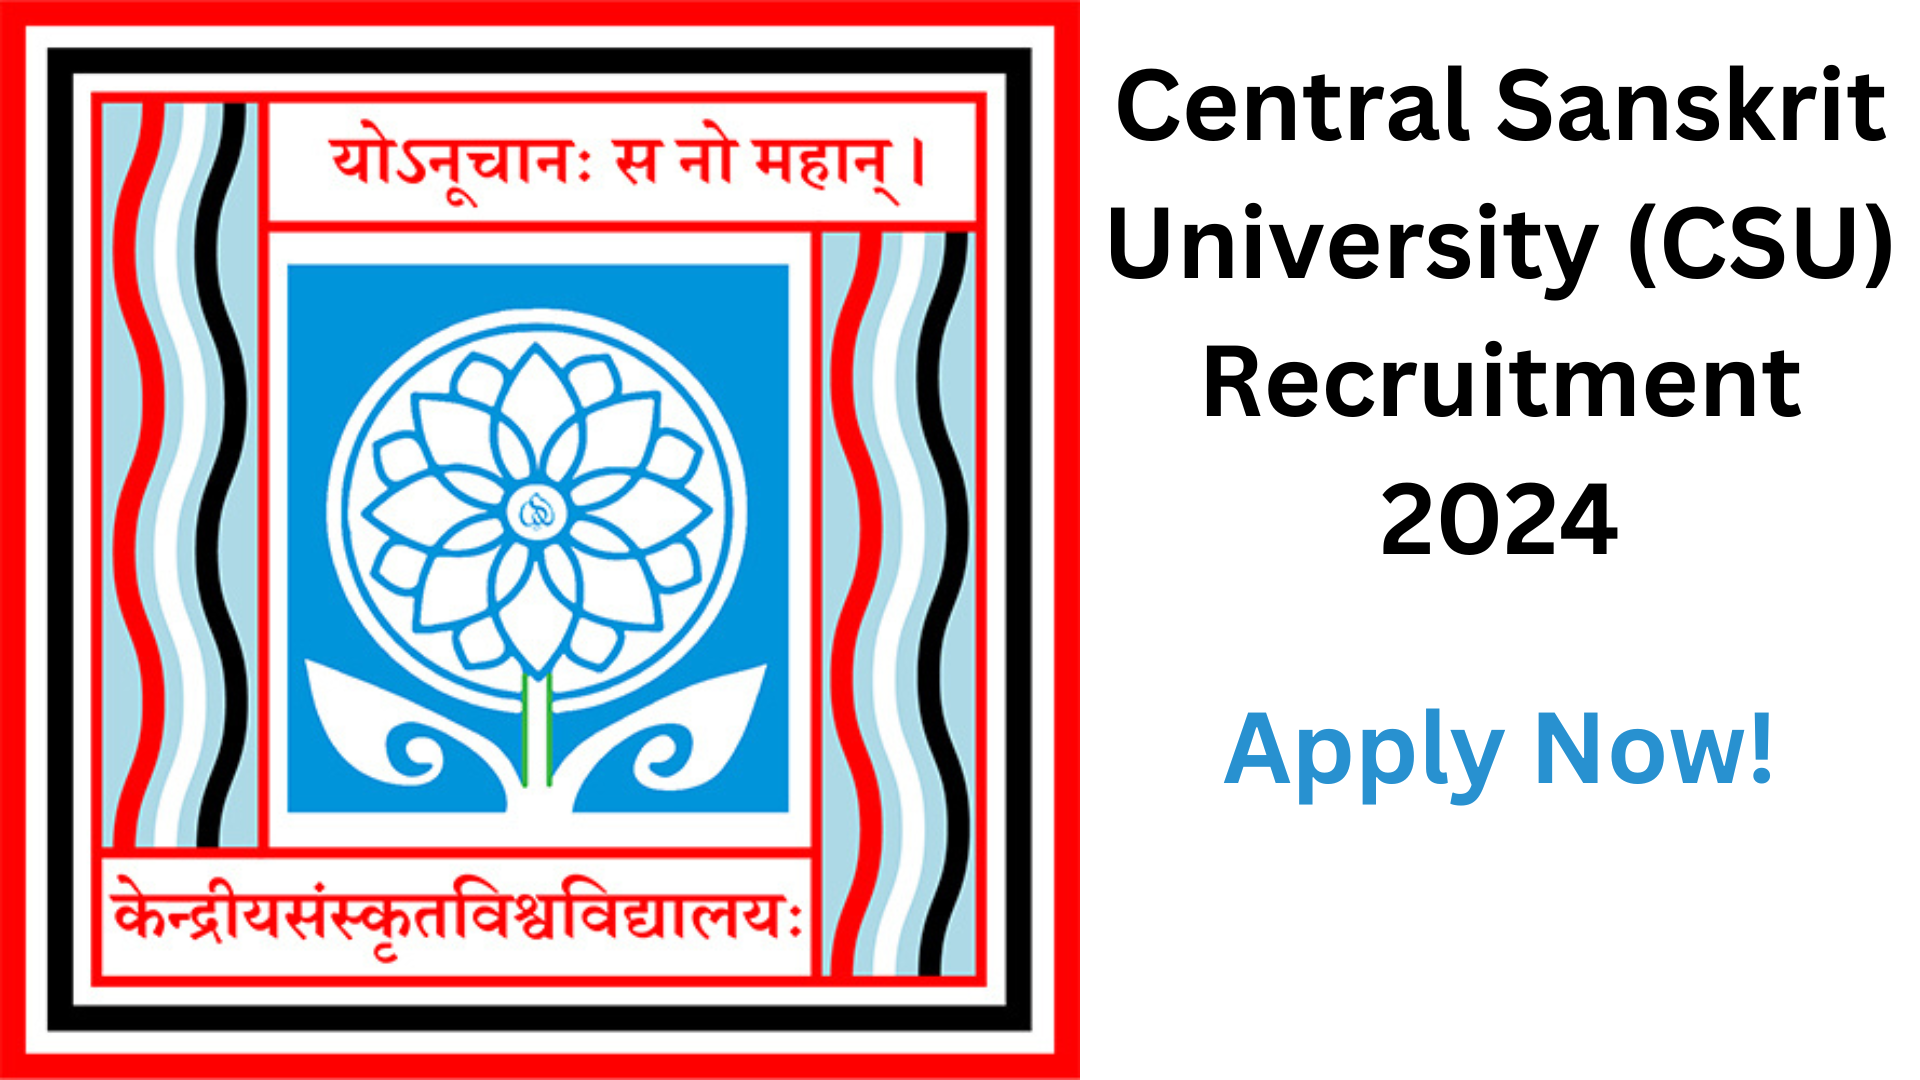 Central Sanskrit University Teaching and Non-Teaching Recruitment 2024, Apply Now, Salary Up To 1,12,400, Eligibility Criteria, and More